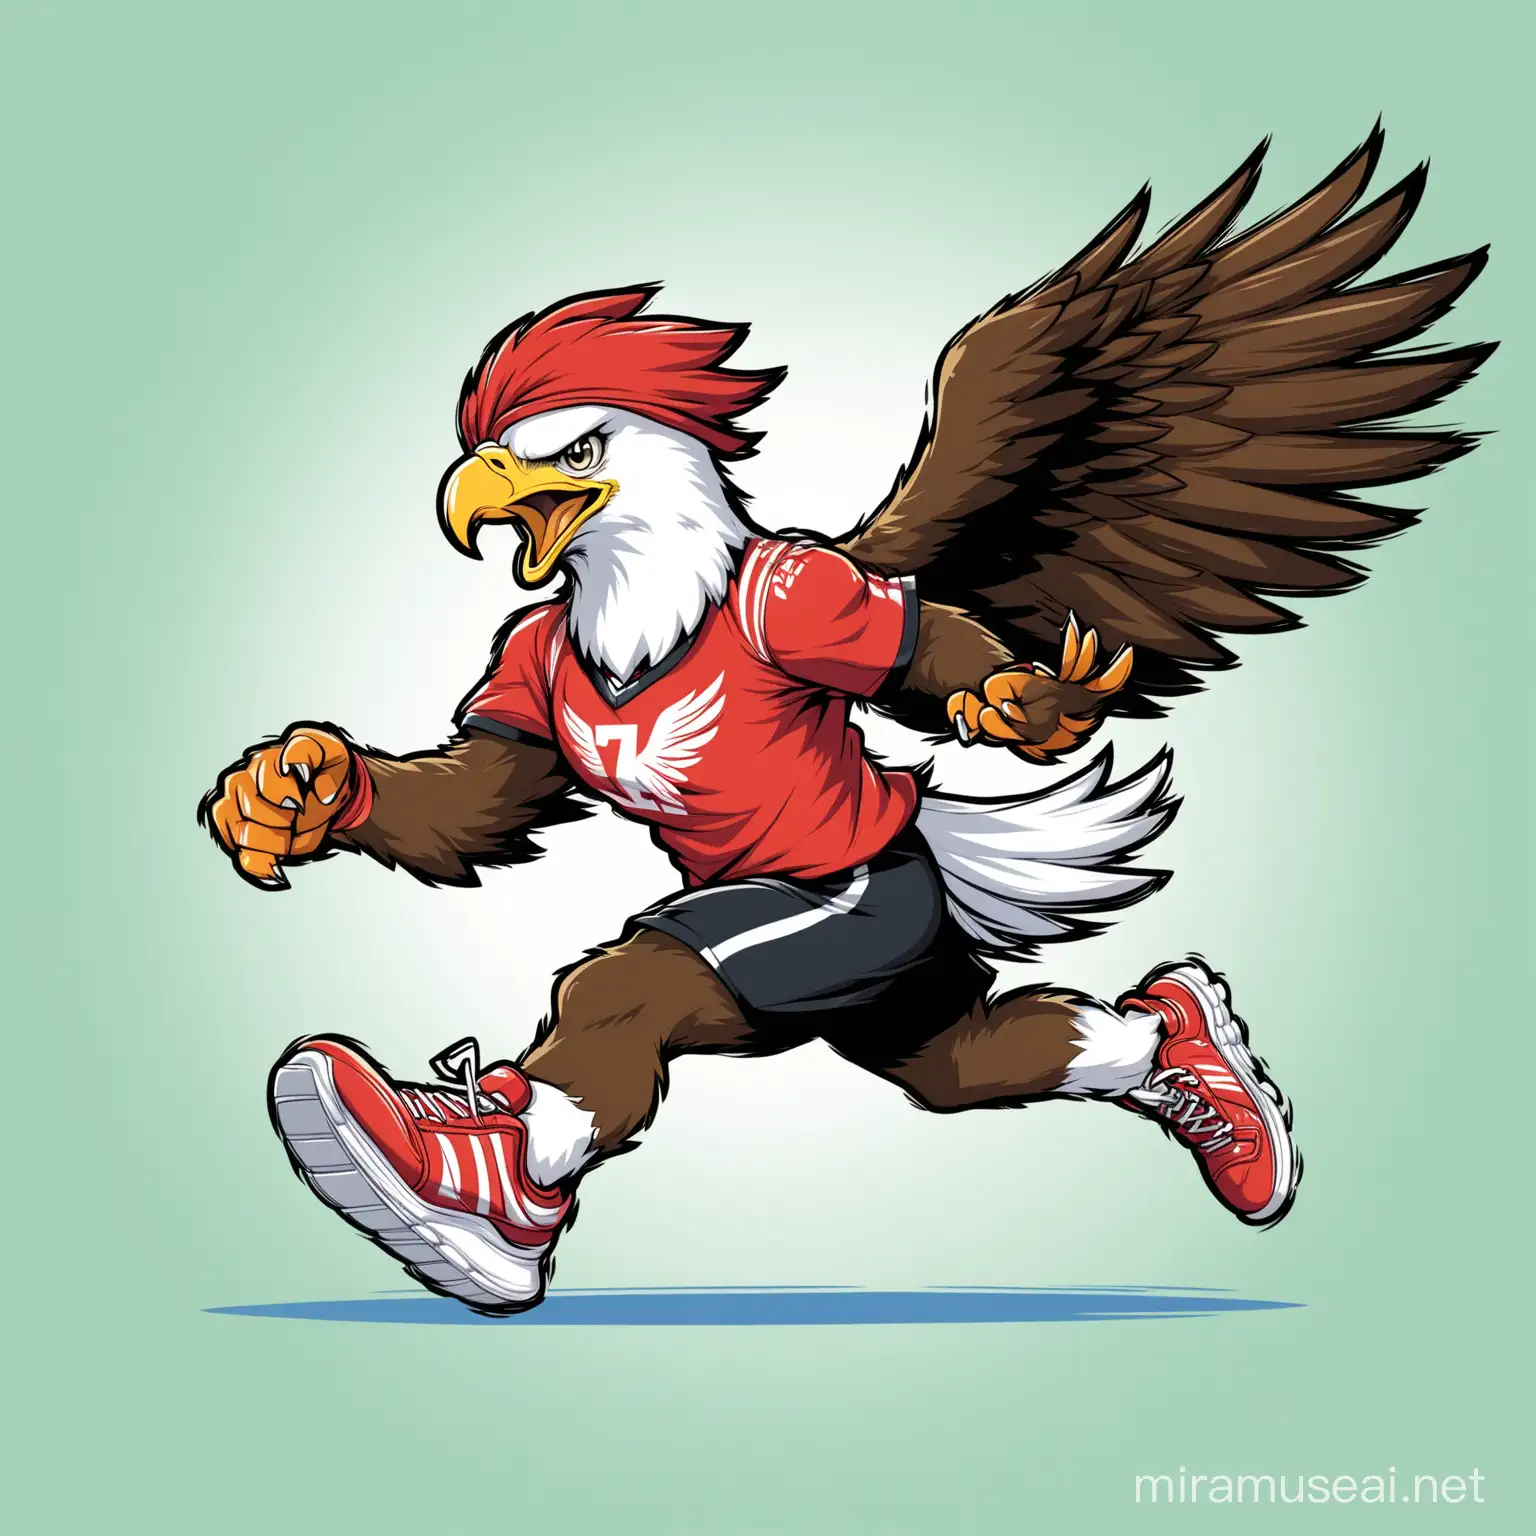 An eagle running in sneakers, a sports mascot, speed.